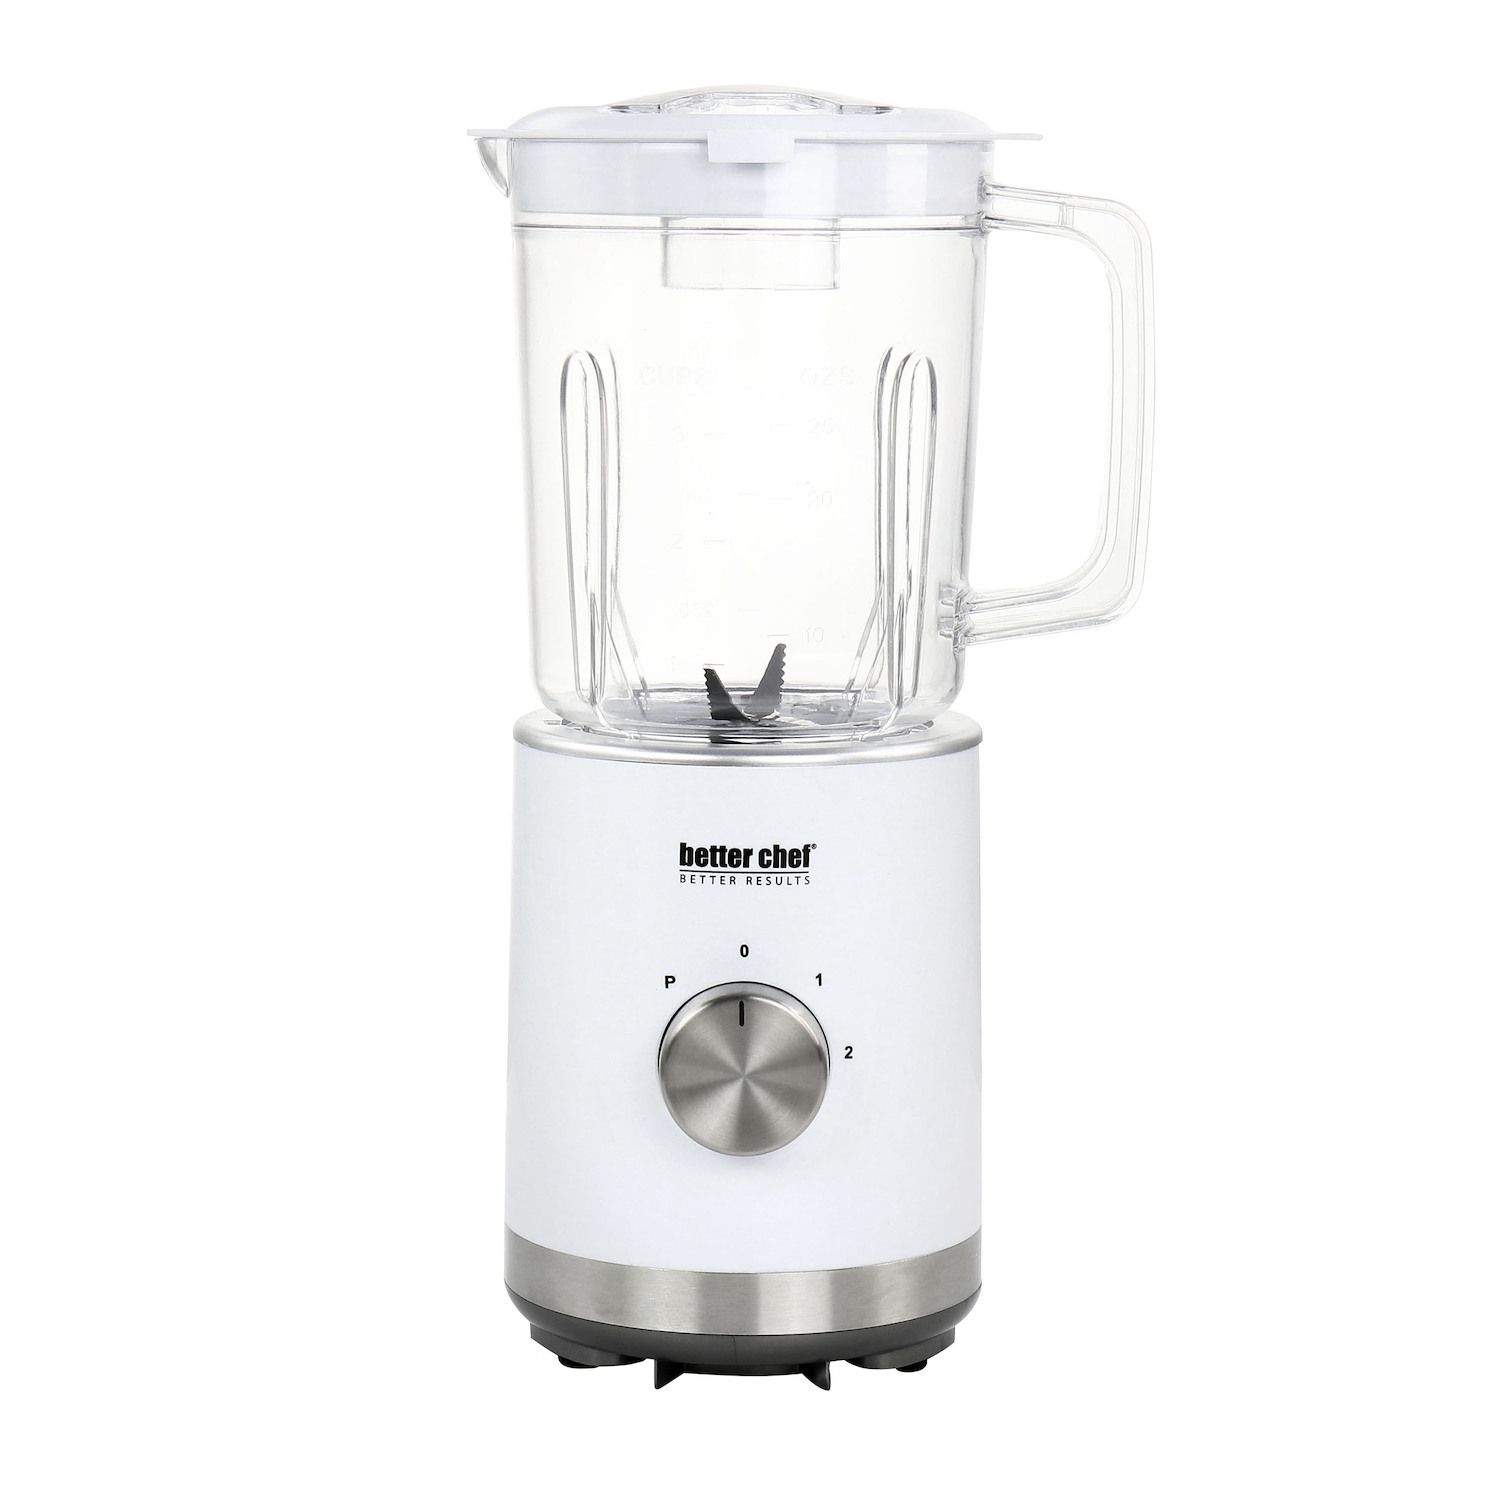 HOMCOM 2 in 1 Blender and Food Processor Combo for Chopping, Slicing,  Shredding, Mincing and Pureeing for Vegetable, Meat and Nuts, 500W 5-Cup  Bowl